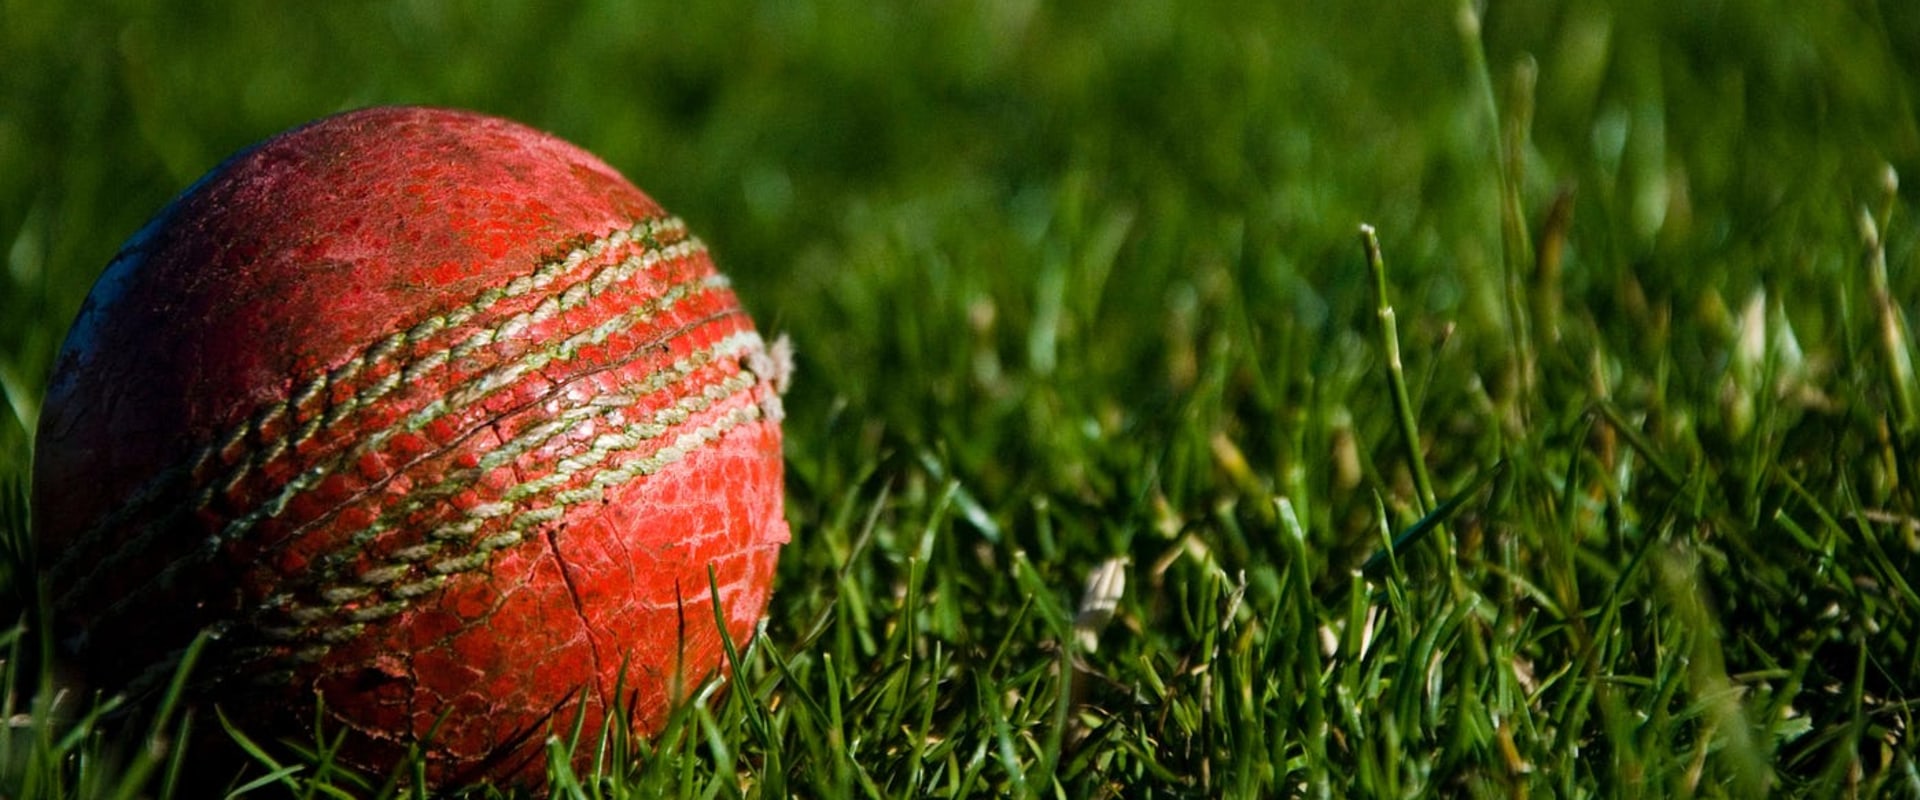 Are there any websites that provide reliable information on making accurate live cricket predictions?